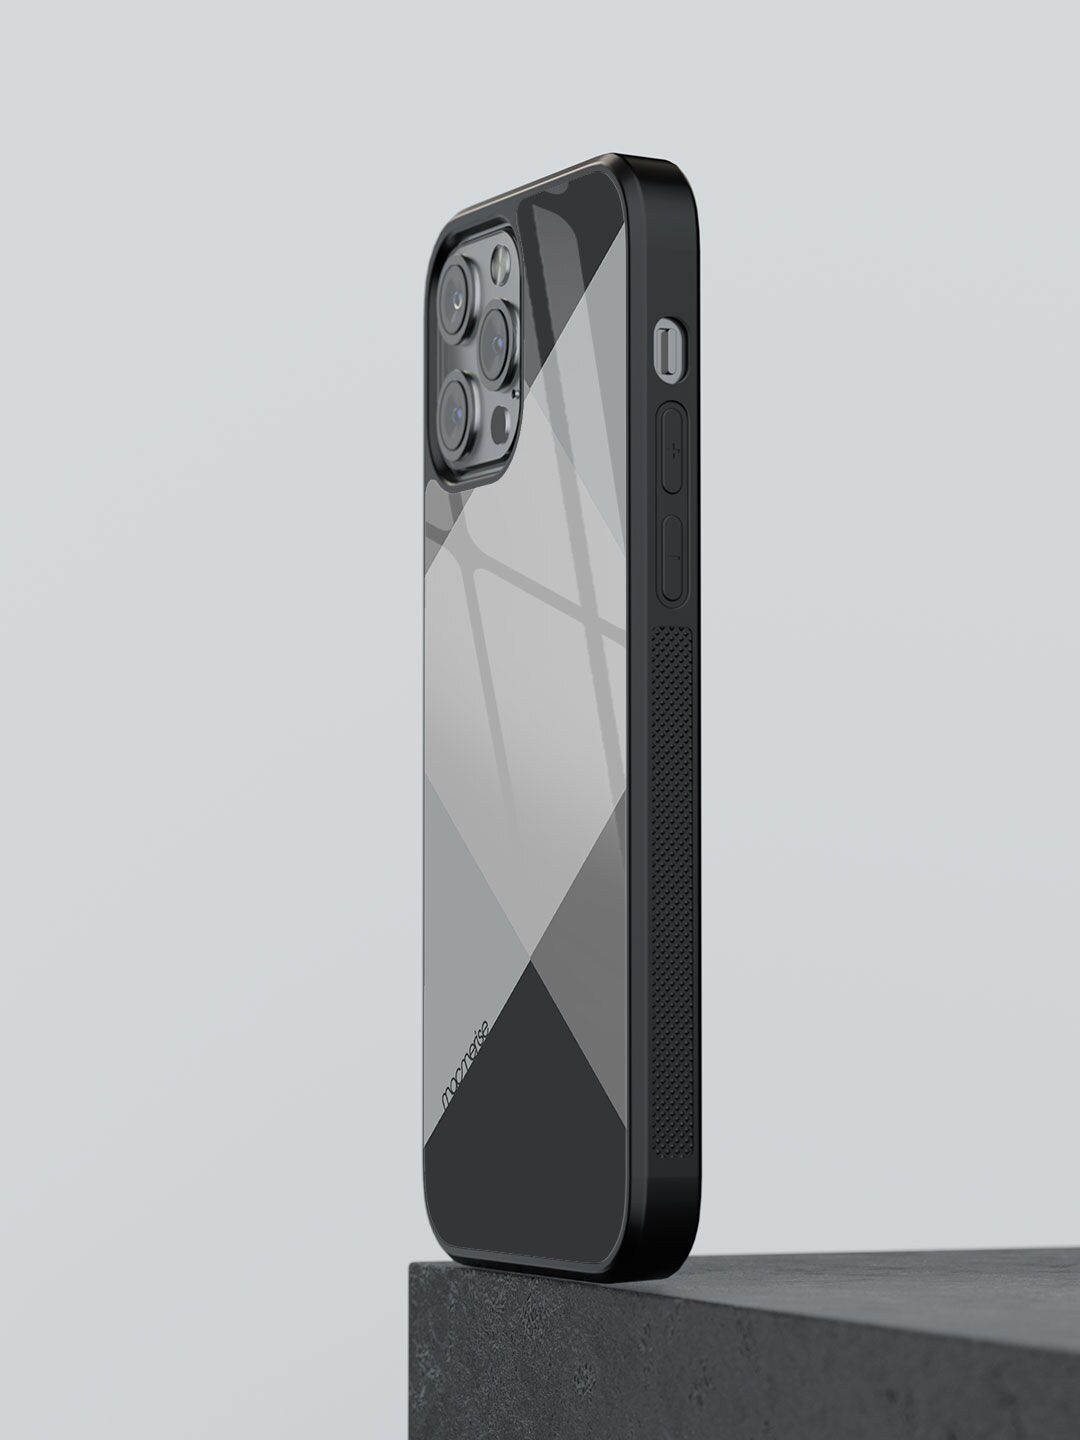 macmerise Grey Criss Cross Printed iPhone 12 Pro Max Back Cover Price in India